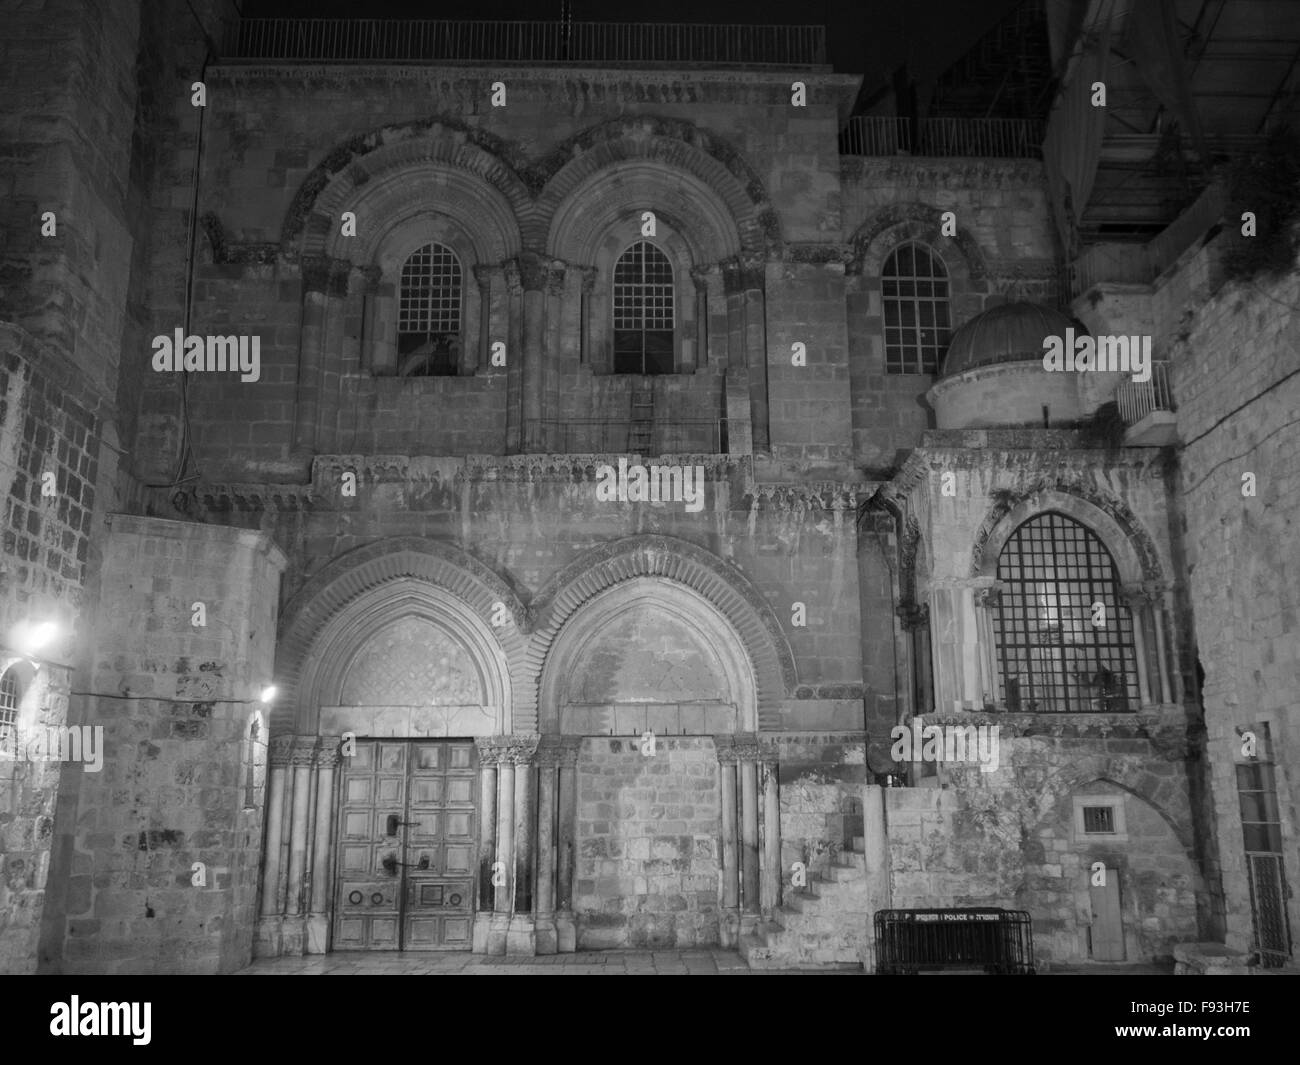 The Church of the Holy Sepulcher at night in black and white Stock Photo